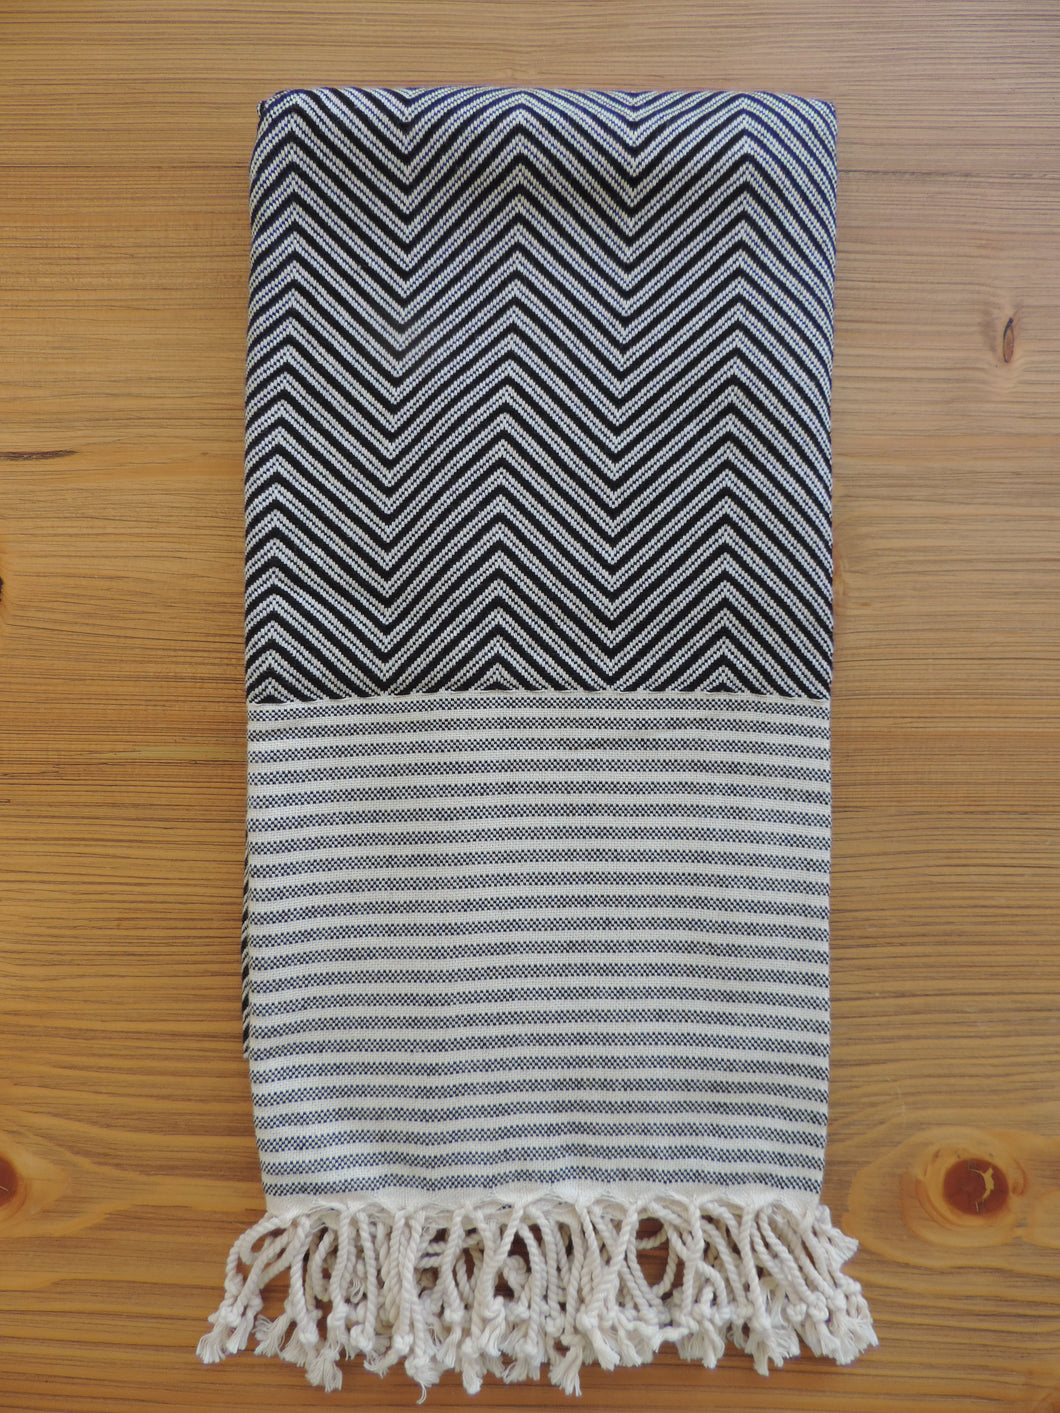 Personalized Blanket handmade in natural turkish organic cotton in black with zigzag herringbone & stripes bordered with tassels